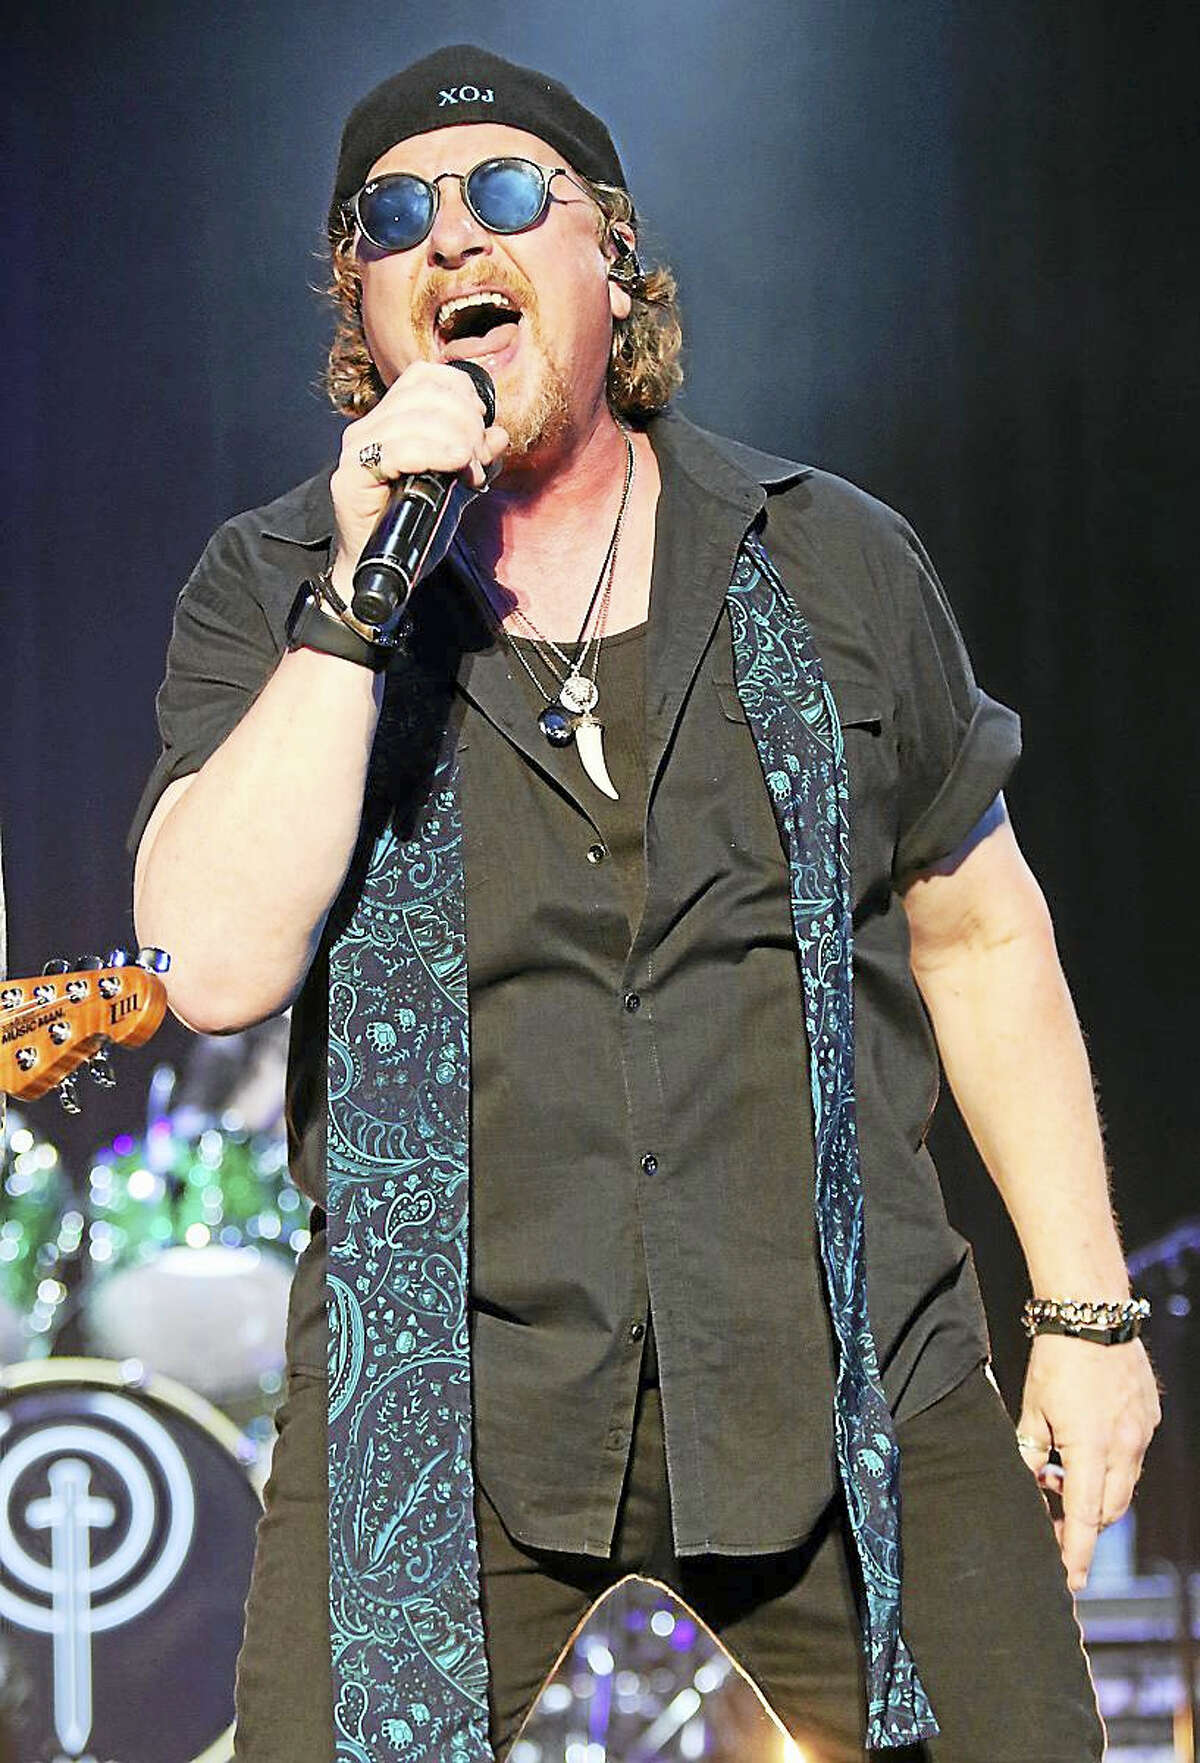 Photo by John AtashianVocalist Joseph Williams is shown singing “Hold The Line” during the start of the Toto concert at the Warner Theatre in Torrington on June 27. The band has released 17 albums and have sold over 40 million records worldwide to date. They have been honored with several Grammy Awards and were inducted into the Musicians Hall of Fame back in 2009. To learn Toto you can visit www.totoofficial.com